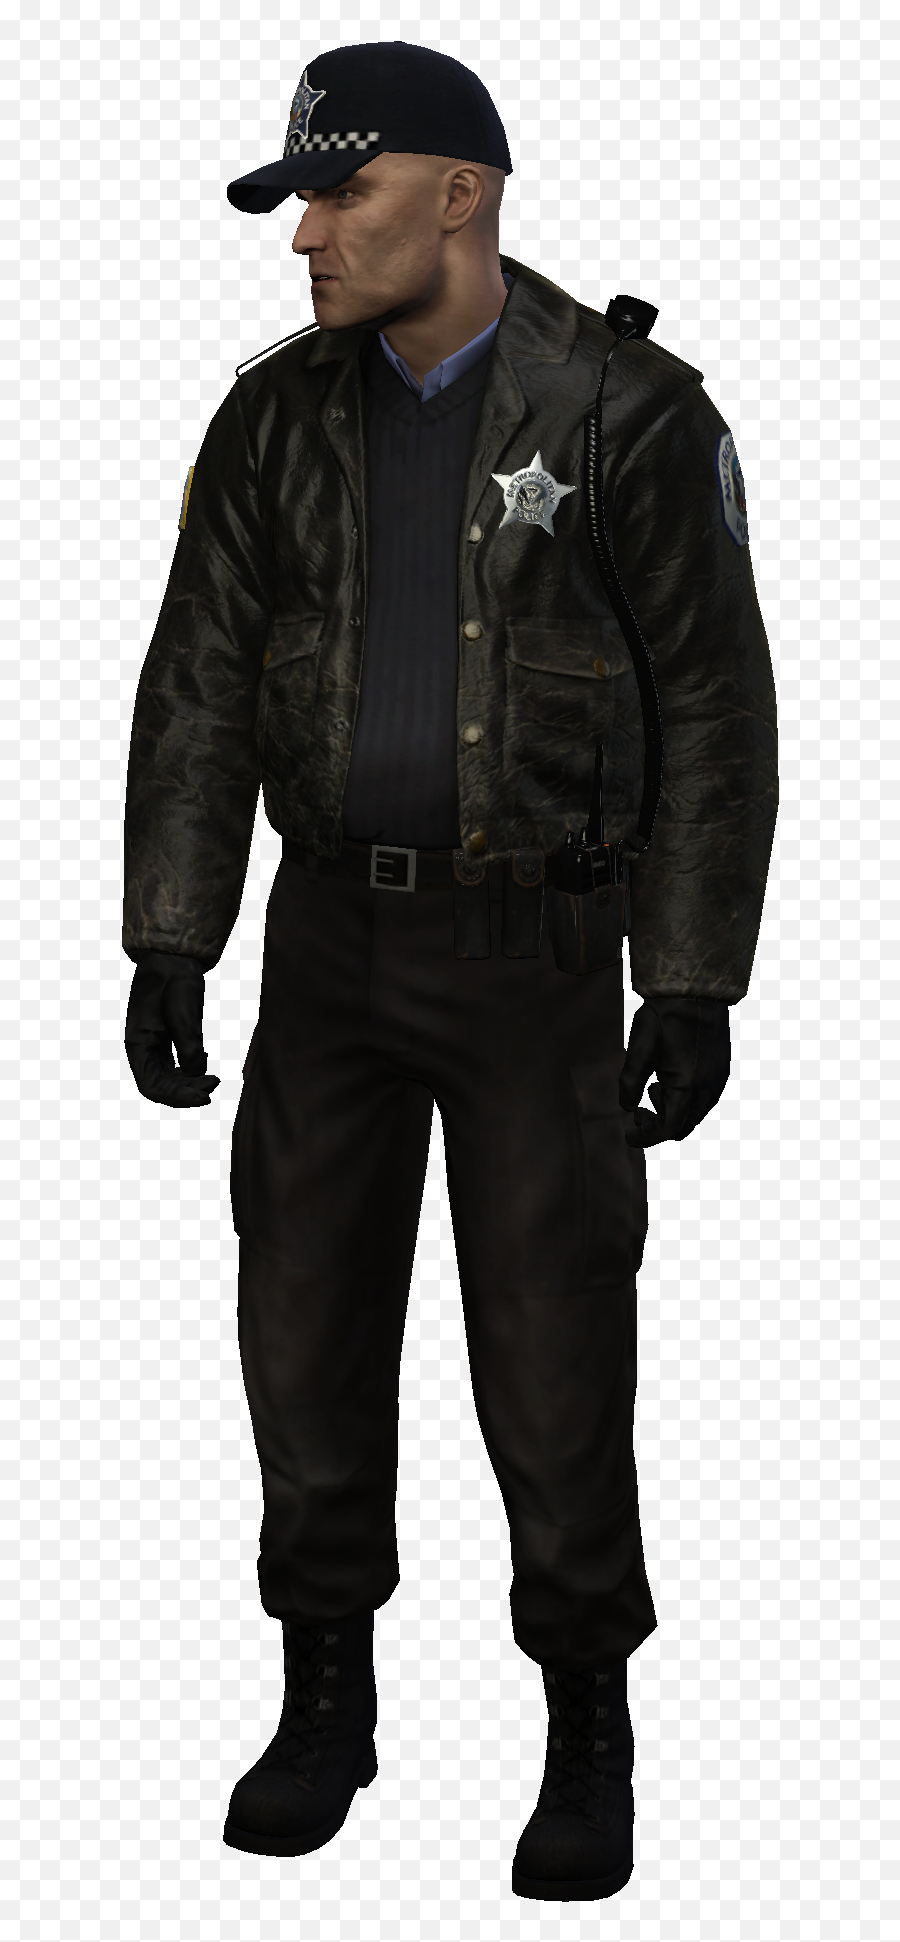 15 Policeman Png Images Free Download - Police Officer,Policeman Png